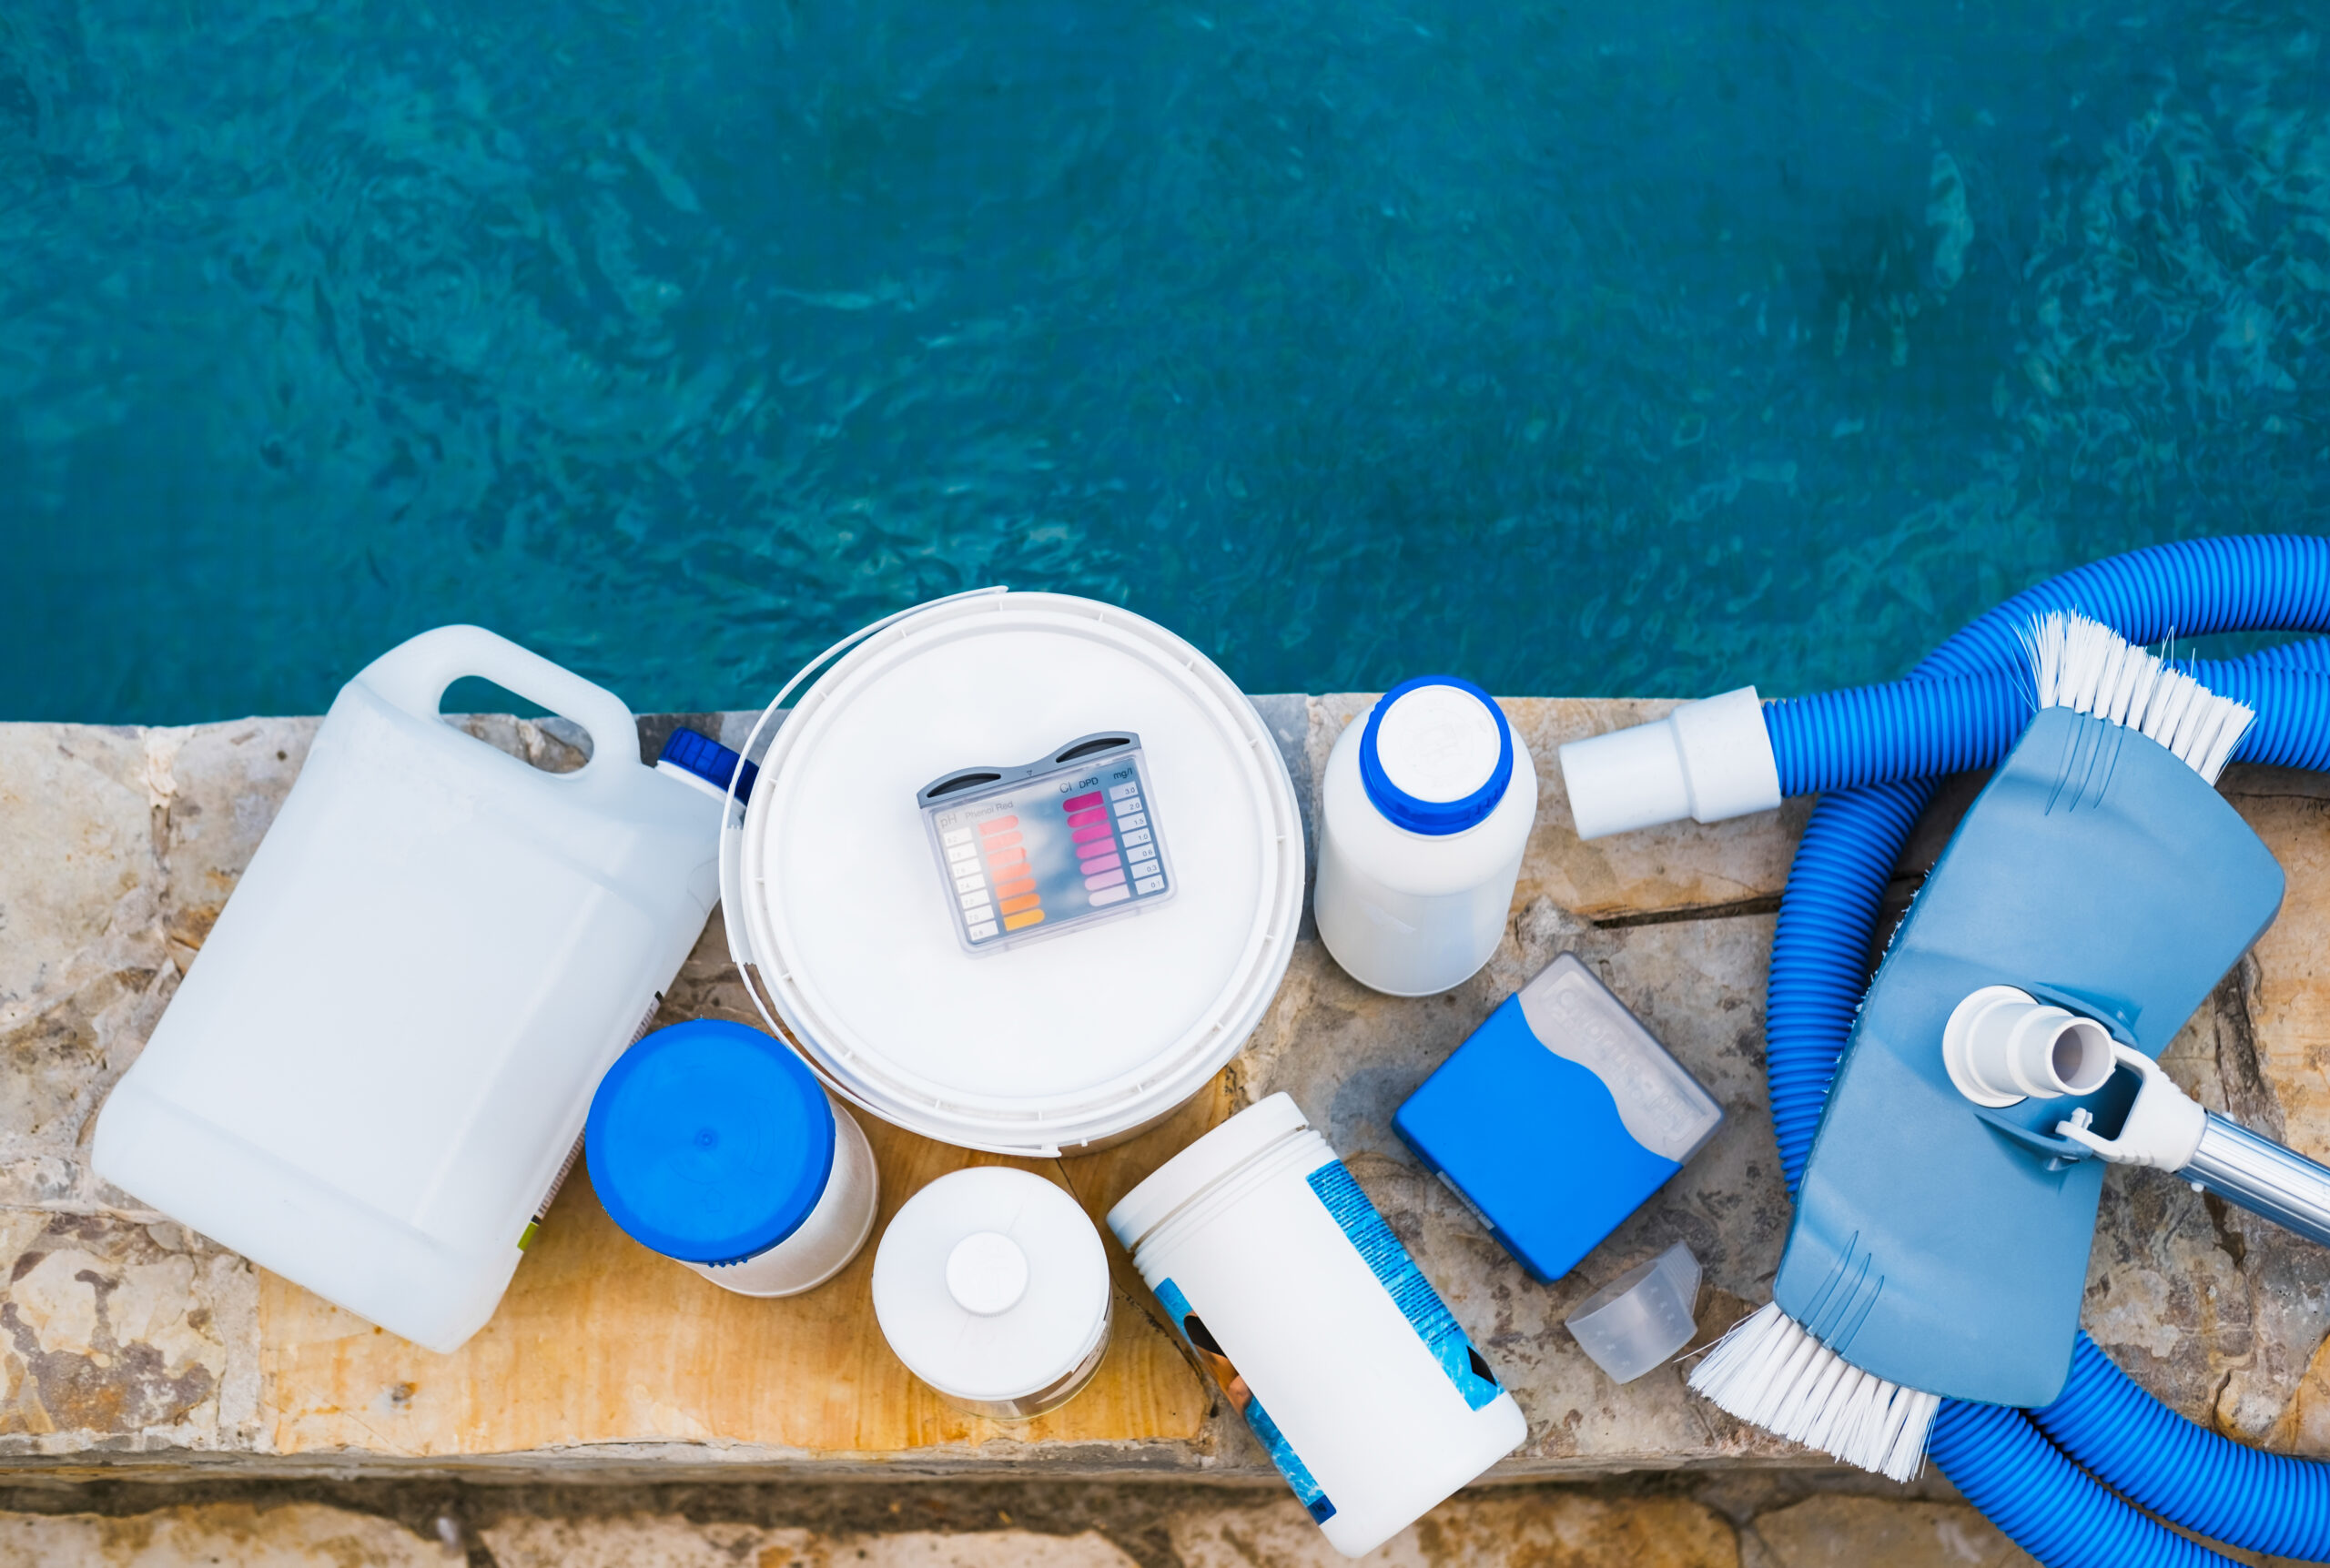 cleaning materials, possibly used for maintaining and cleaning a pool or other surfaces.